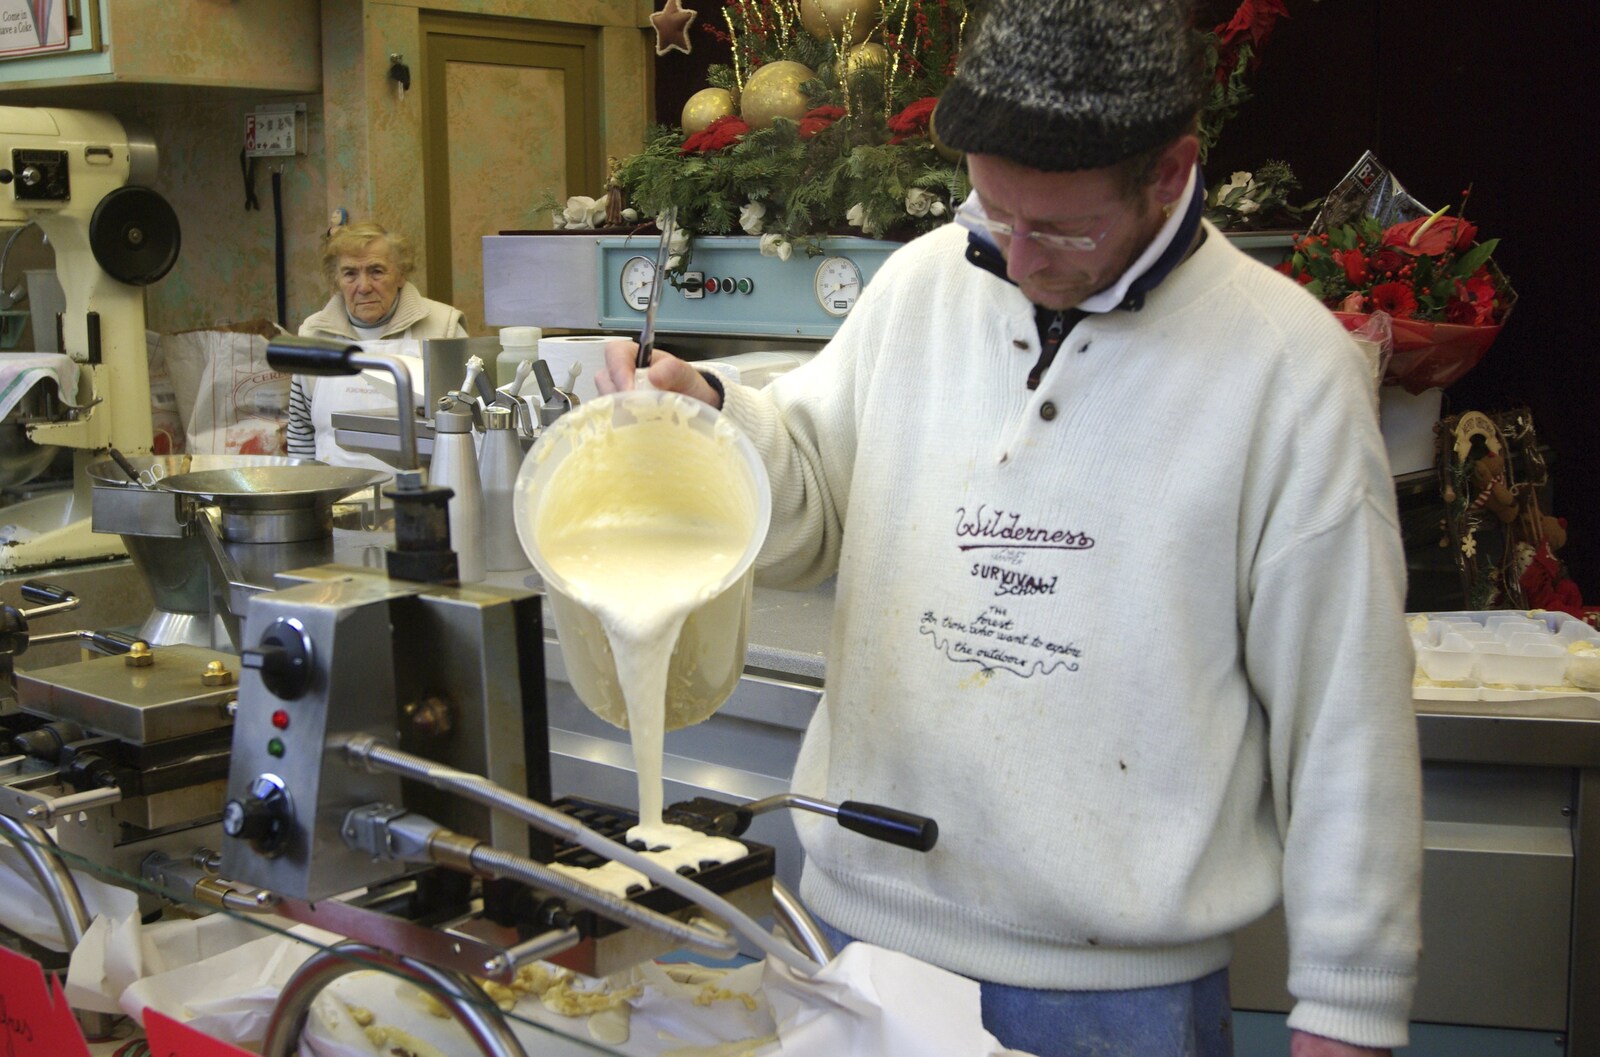 Waffle batter is poured into a waffle iron from The Christmas Markets of Brussels, Belgium - 1st January 2007